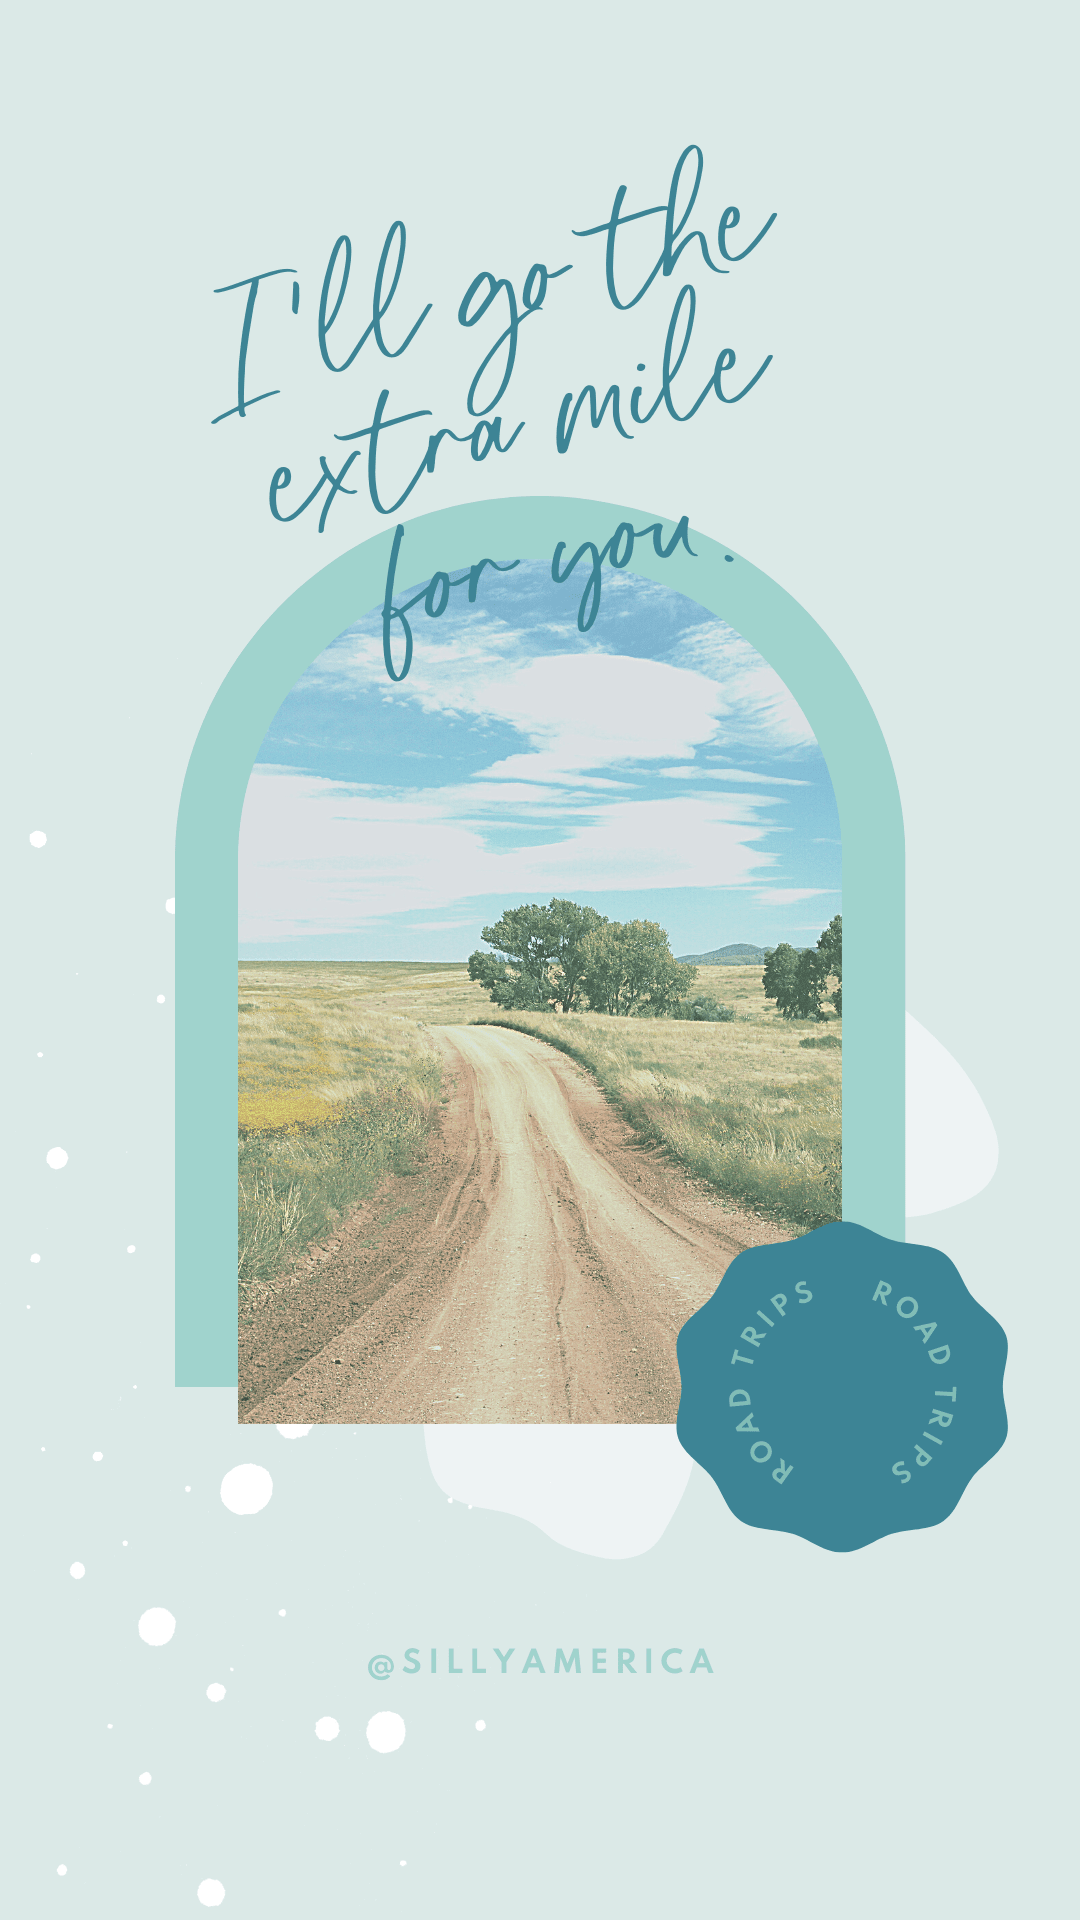 I’ll go the extra mile for you. - Road Trip Captions for Instagram